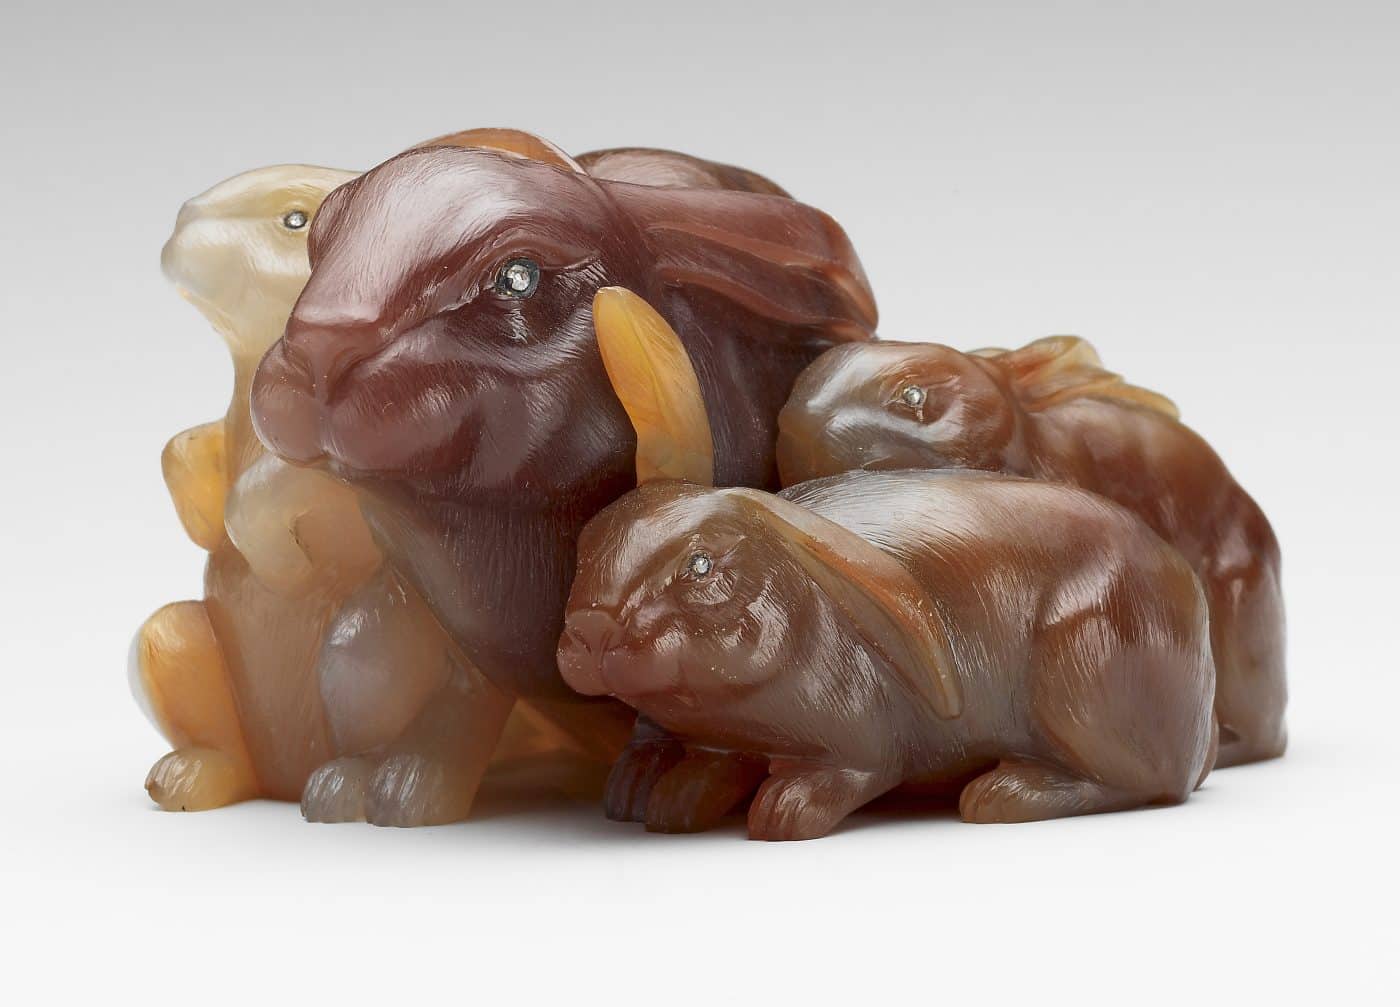 Fabergé carved bunnies with gem eyes
